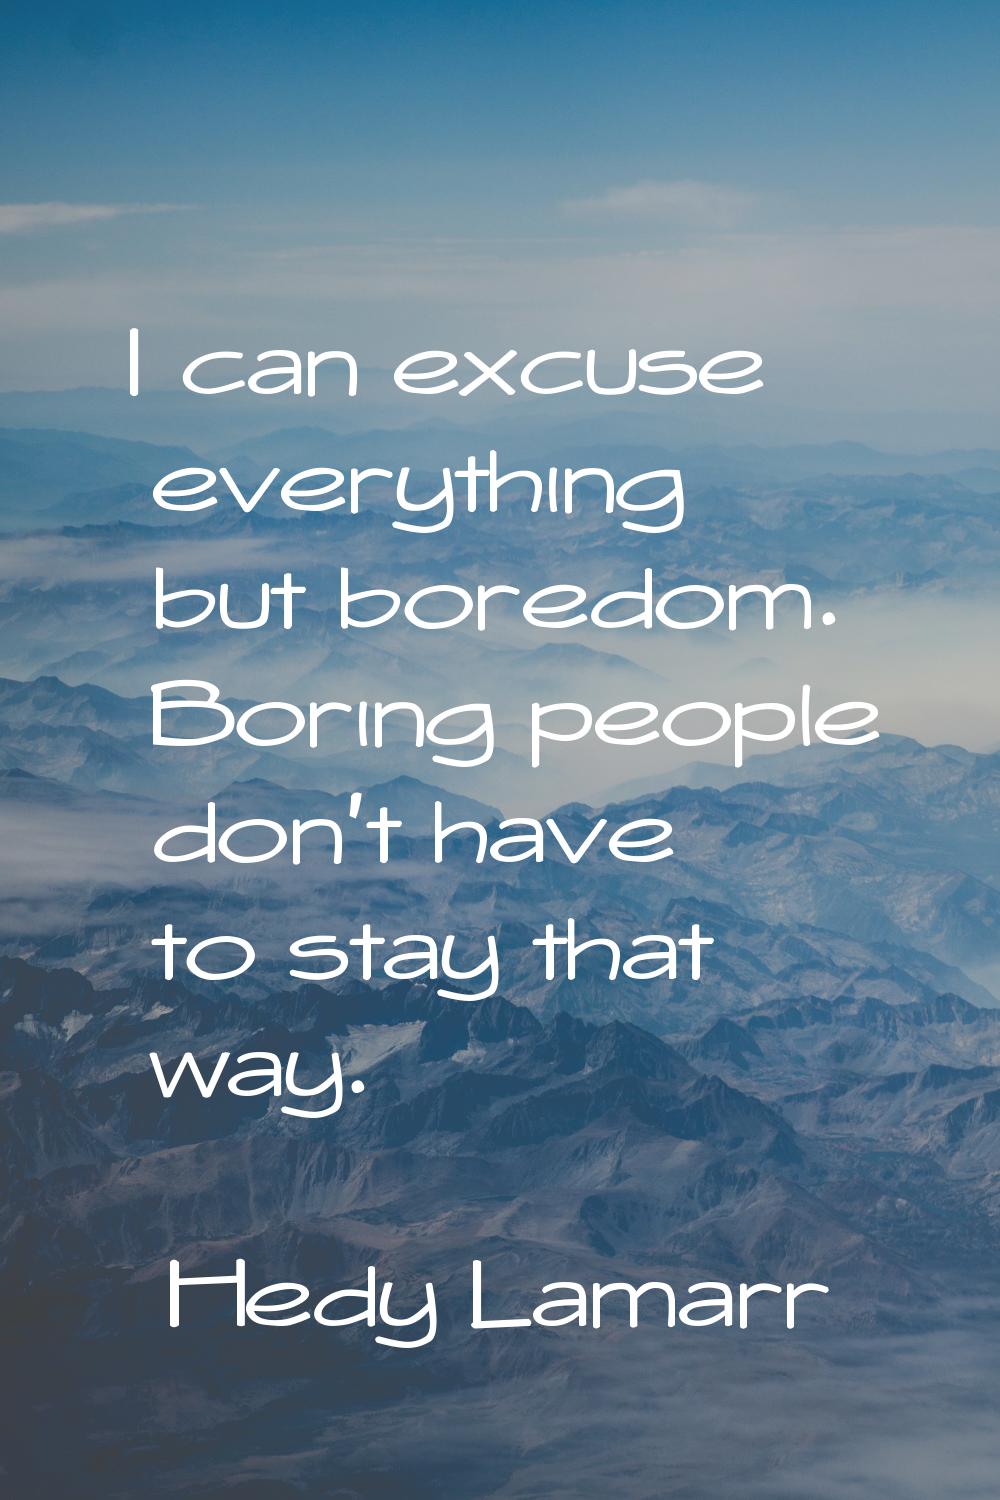 I can excuse everything but boredom. Boring people don't have to stay that way.